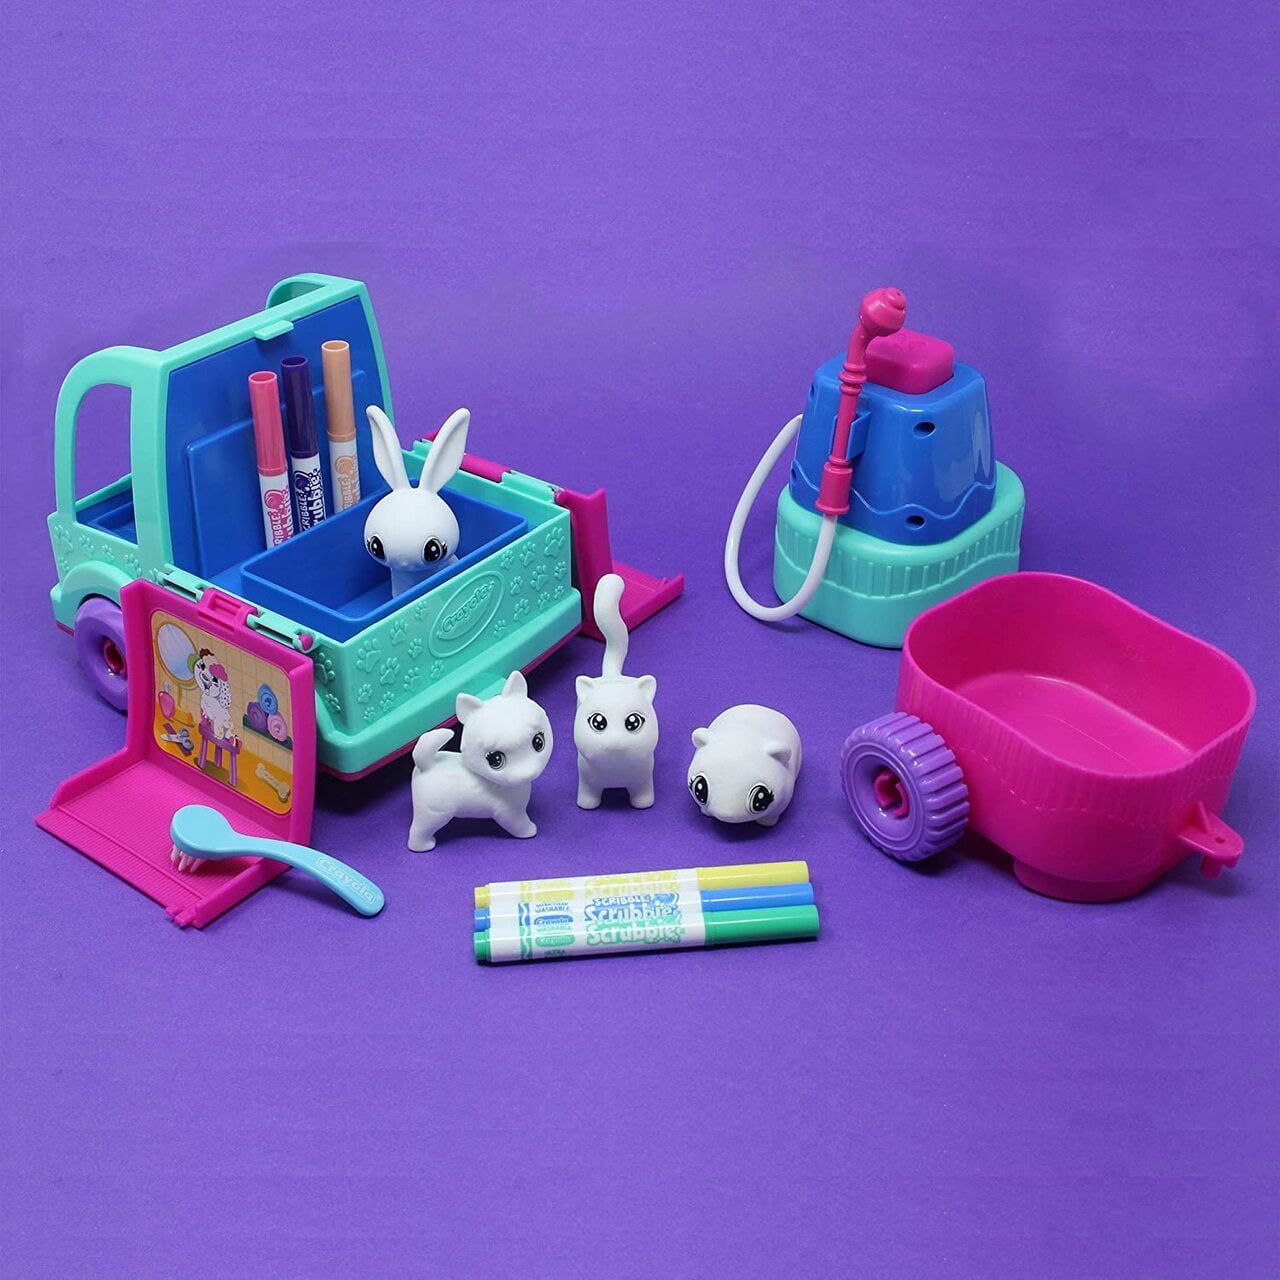 Crayola Scribble Scrubbie Pets Scented Spa Activity Kit : Target